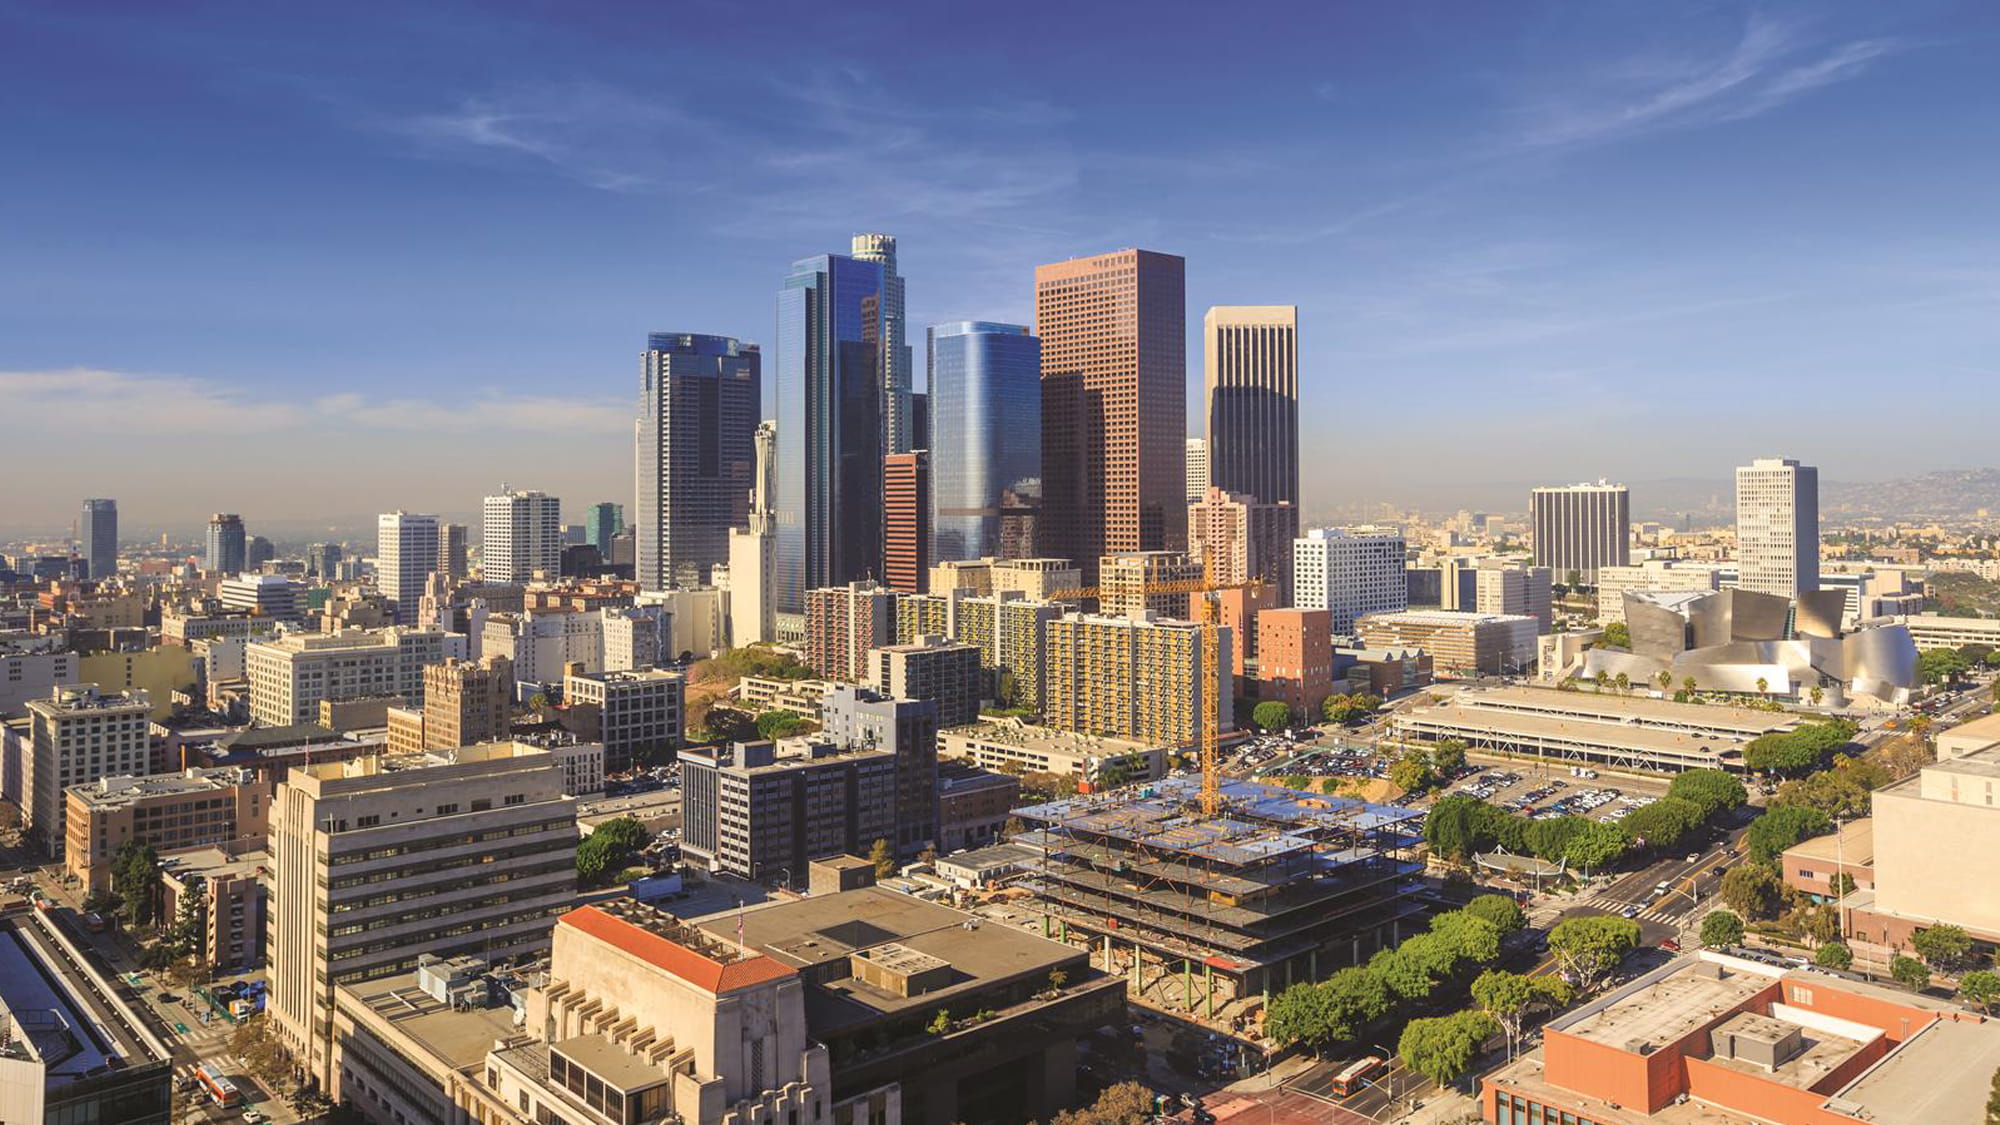 View of Los Angeles city. Credit: Shutterstock